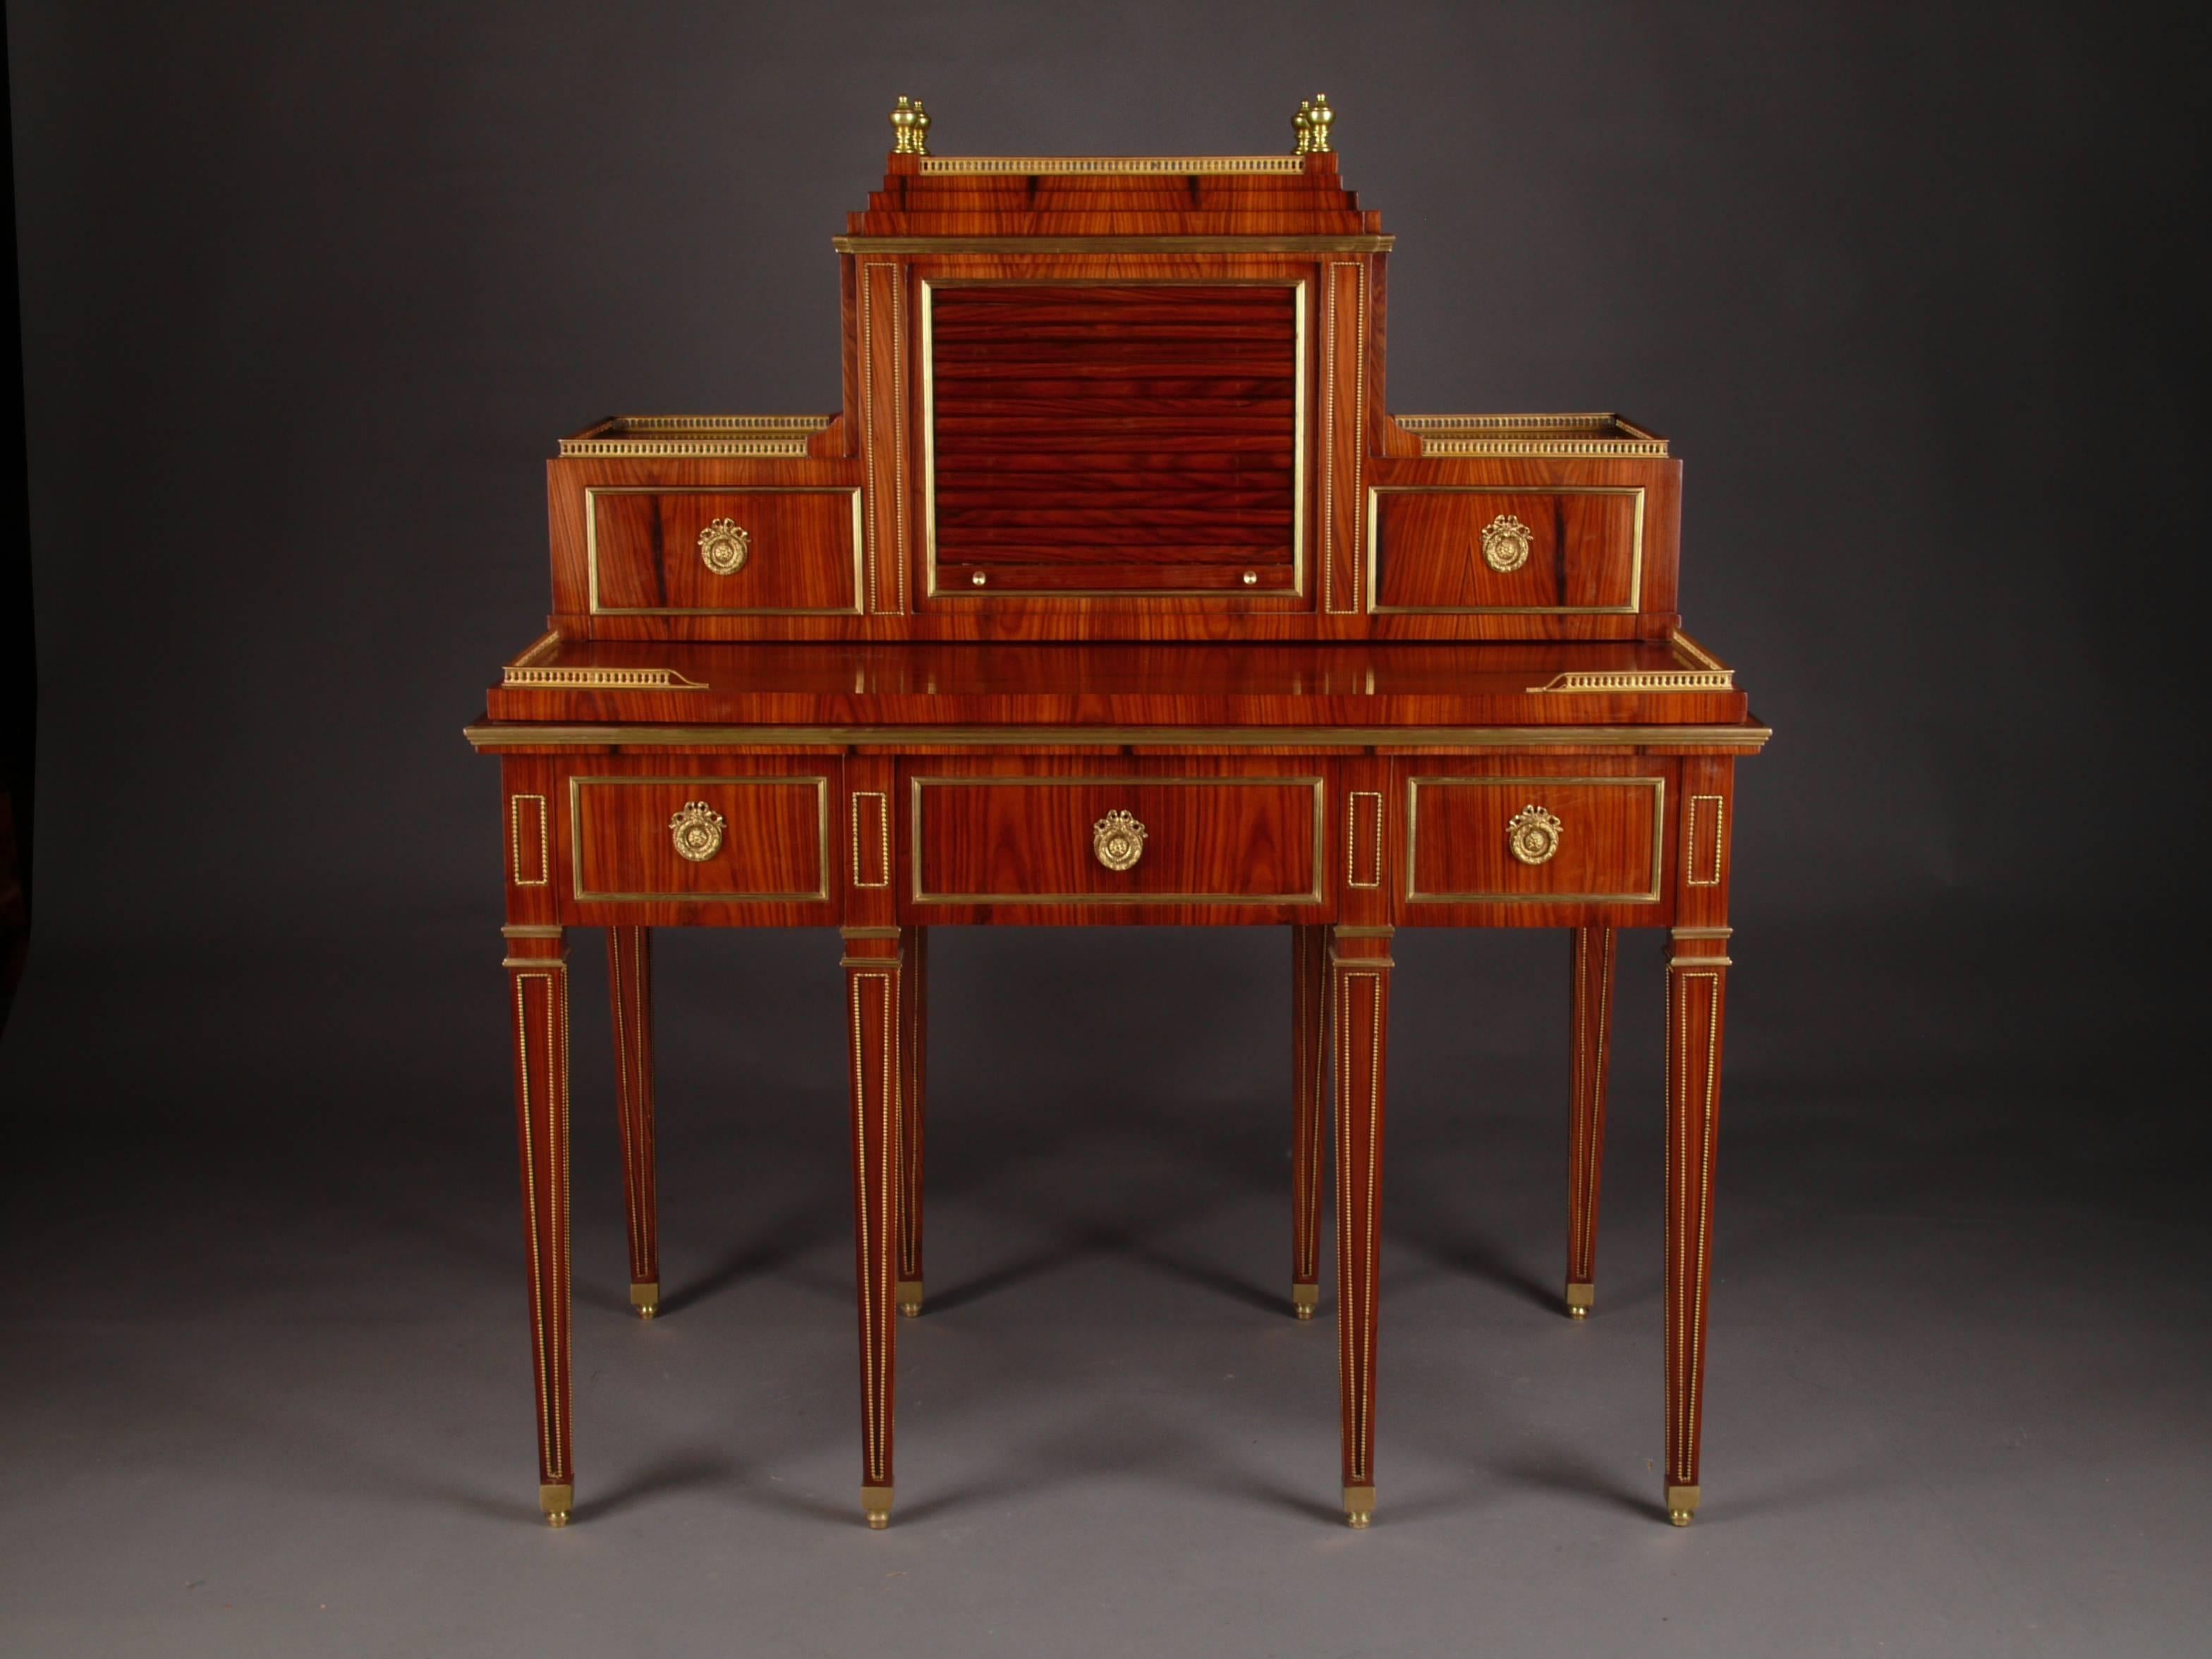 Palisander on solid pinewood. Border table on the front side one real and two false drawers, on the side a secret drawer over conical pointed, with brass beaded legs. The drawer fronts in brass profile. A flush edging gallery in balustrade form. A